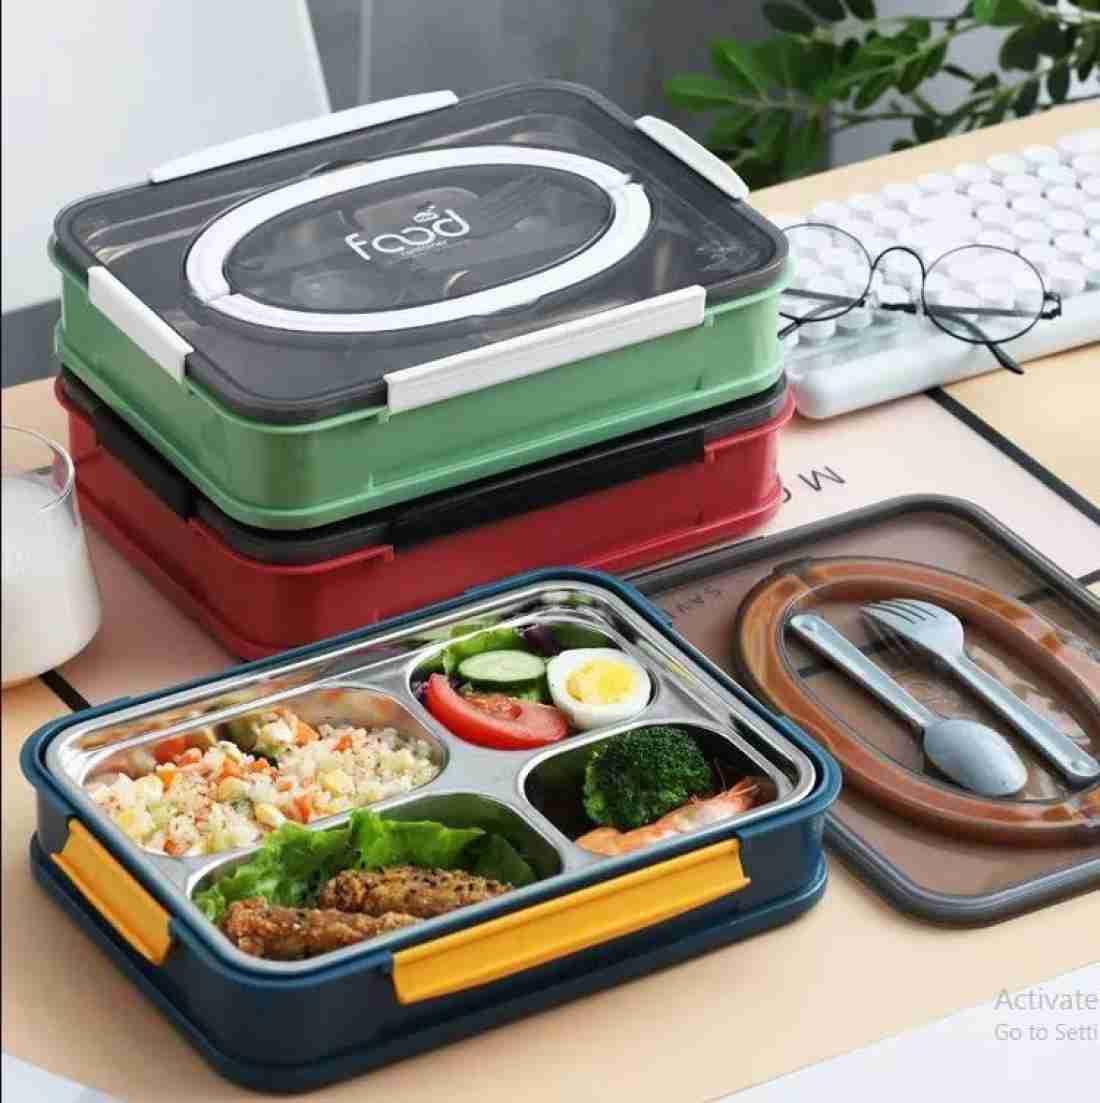 https://rukminim2.flixcart.com/image/1100/1300/l3khsi80/lunch-box/e/f/x/1100-4-compartment-stainless-steel-lunch-boxes-tiffin-box-for-original-imagent7dnmk4fv2.jpeg?q=20